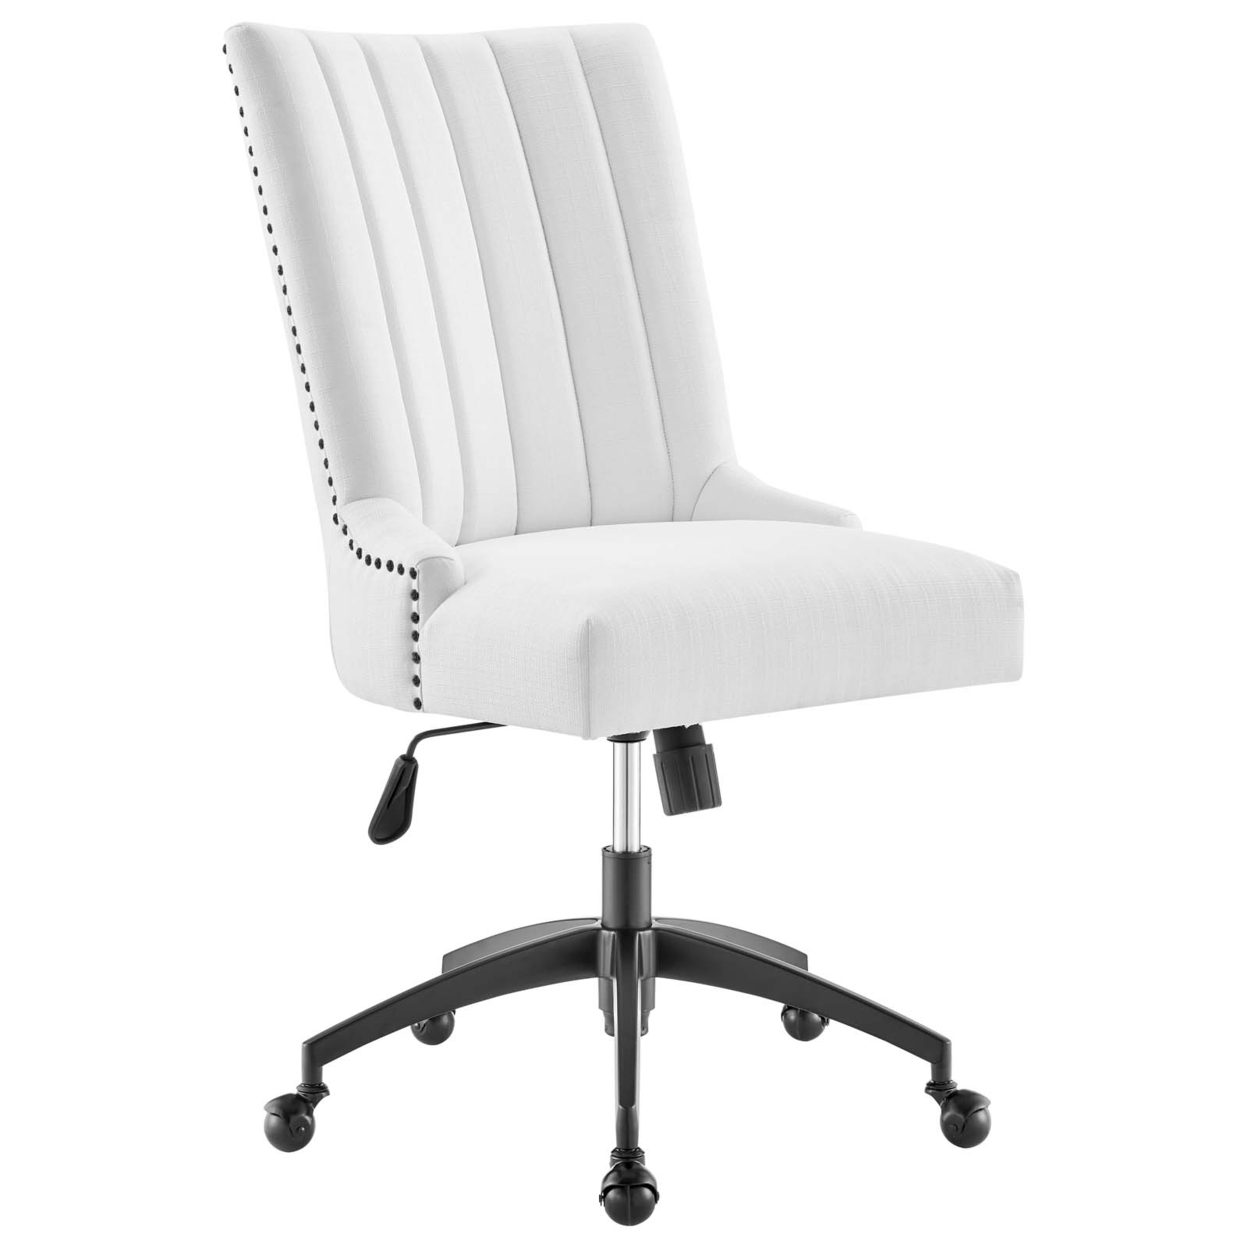 Empower Channel Tufted Fabric Office Chair, Black White